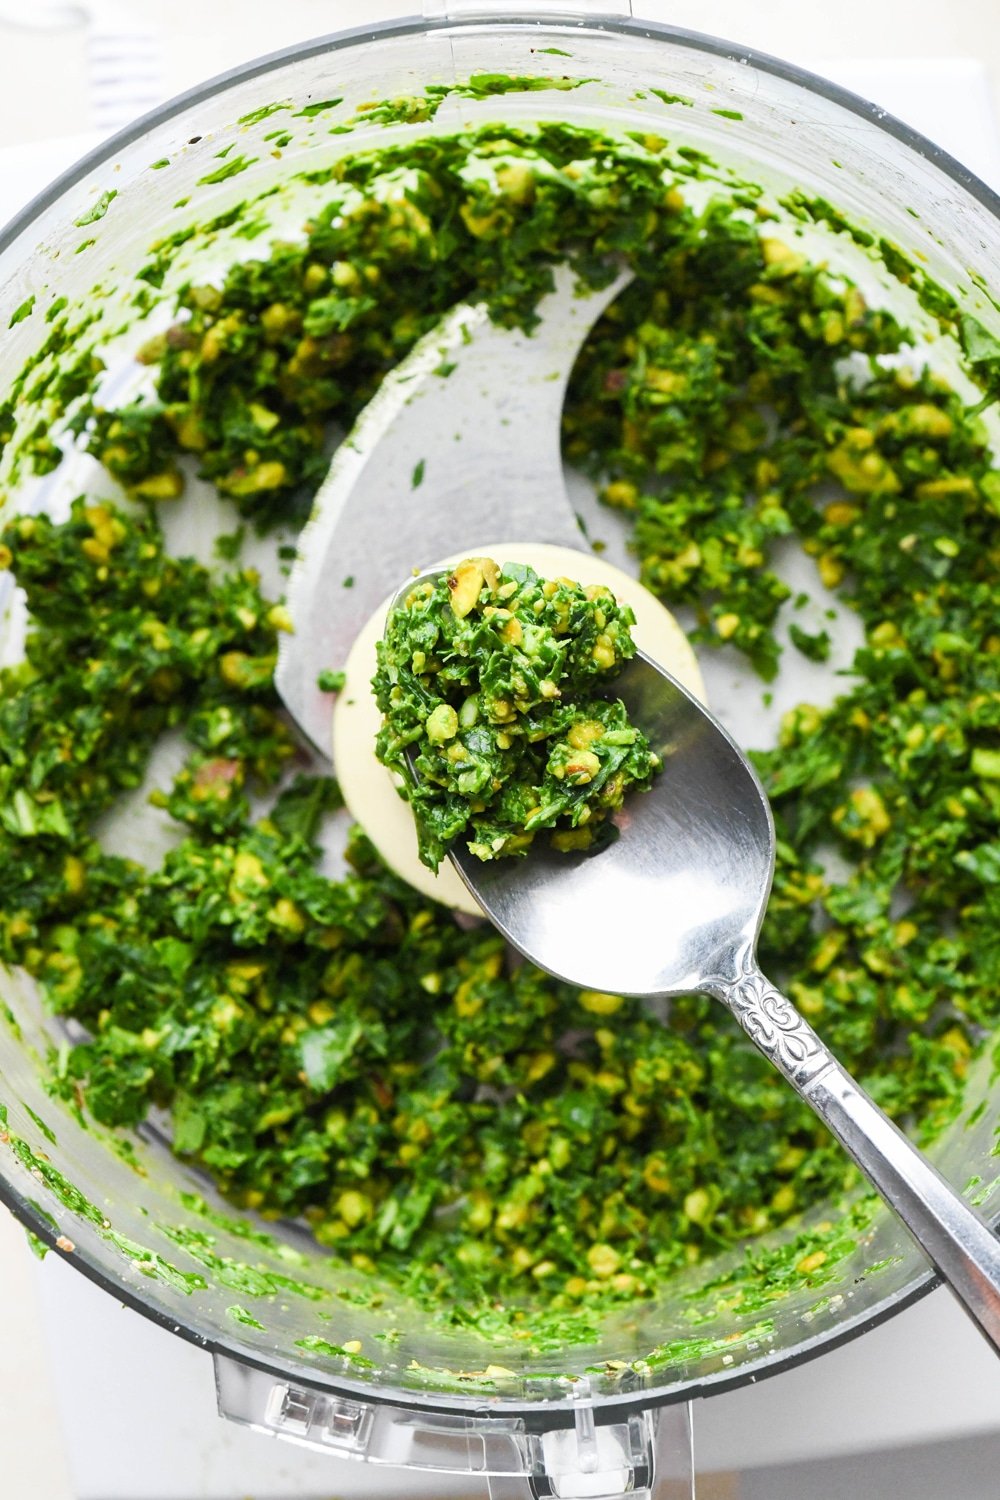 How to make pistachio pesto: Dry ingredients in the container of a food processor after pulsing together, with a spoon lifting some of the mixture out to show the texture.